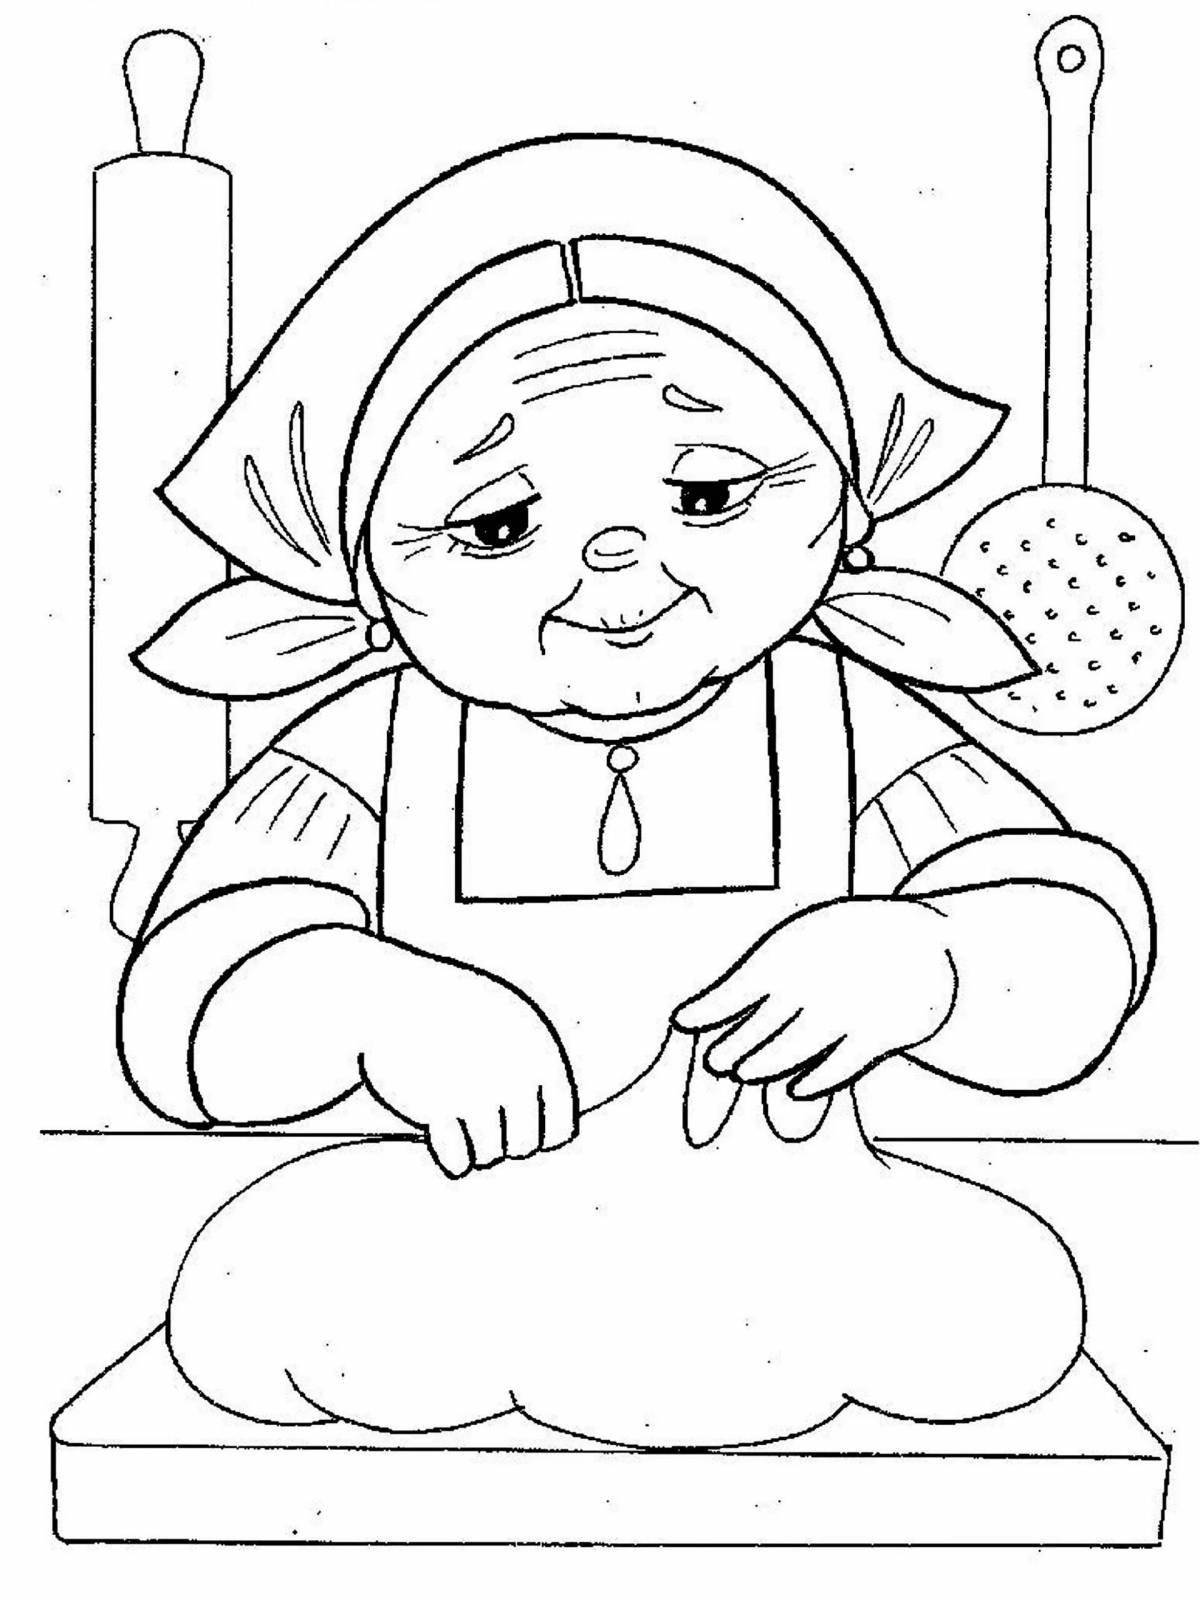 Fun test coloring page